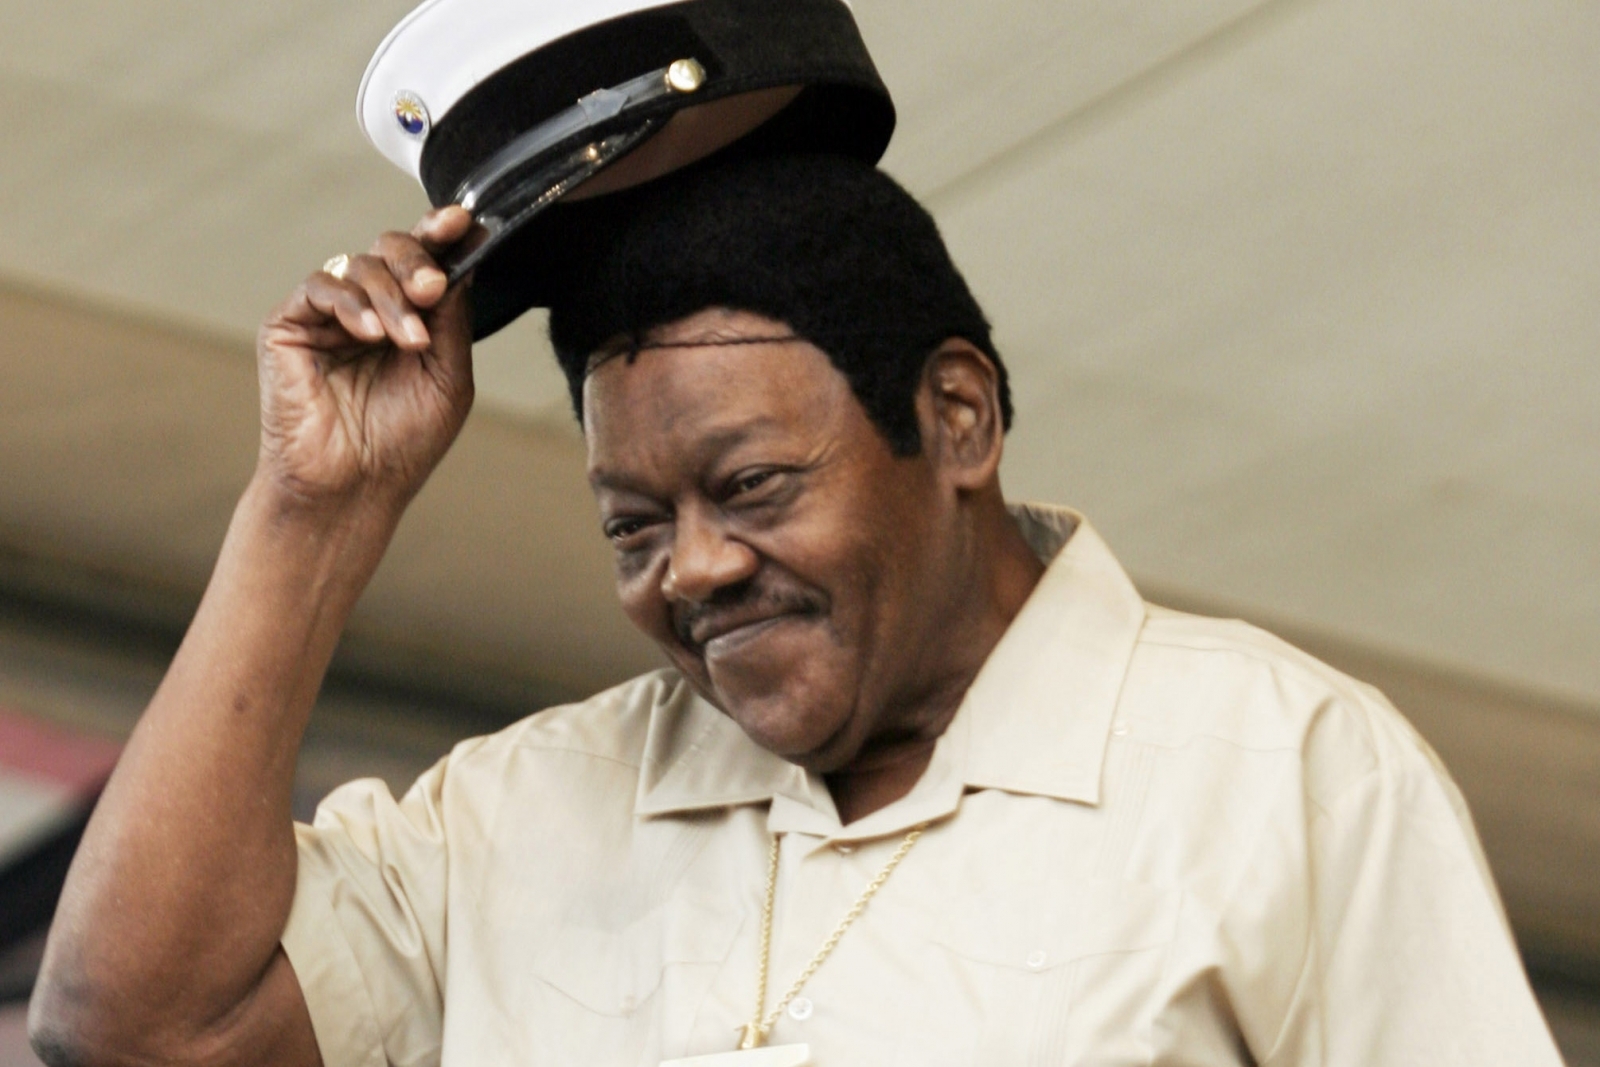 Legendary New Orleans musician Fats Domino dies aged 89